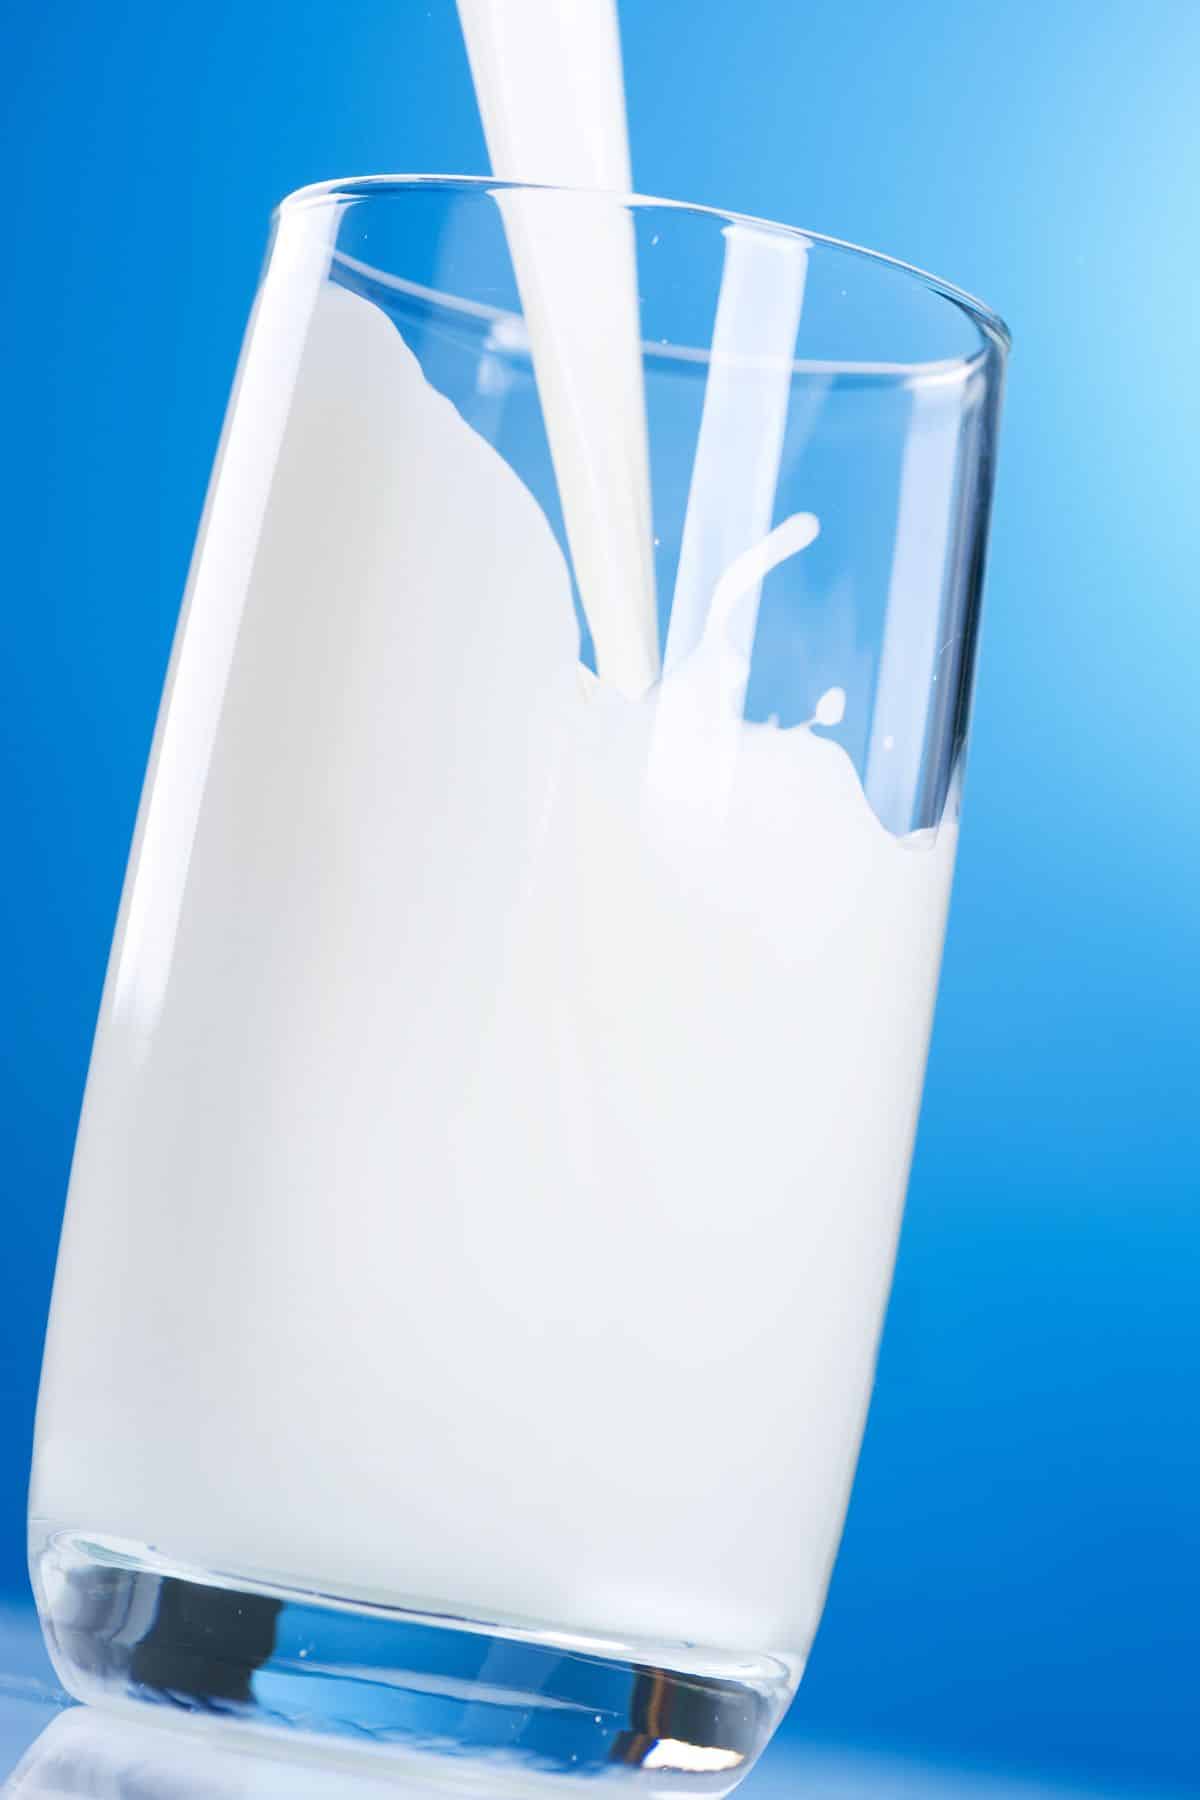 milk being poured into a glass.